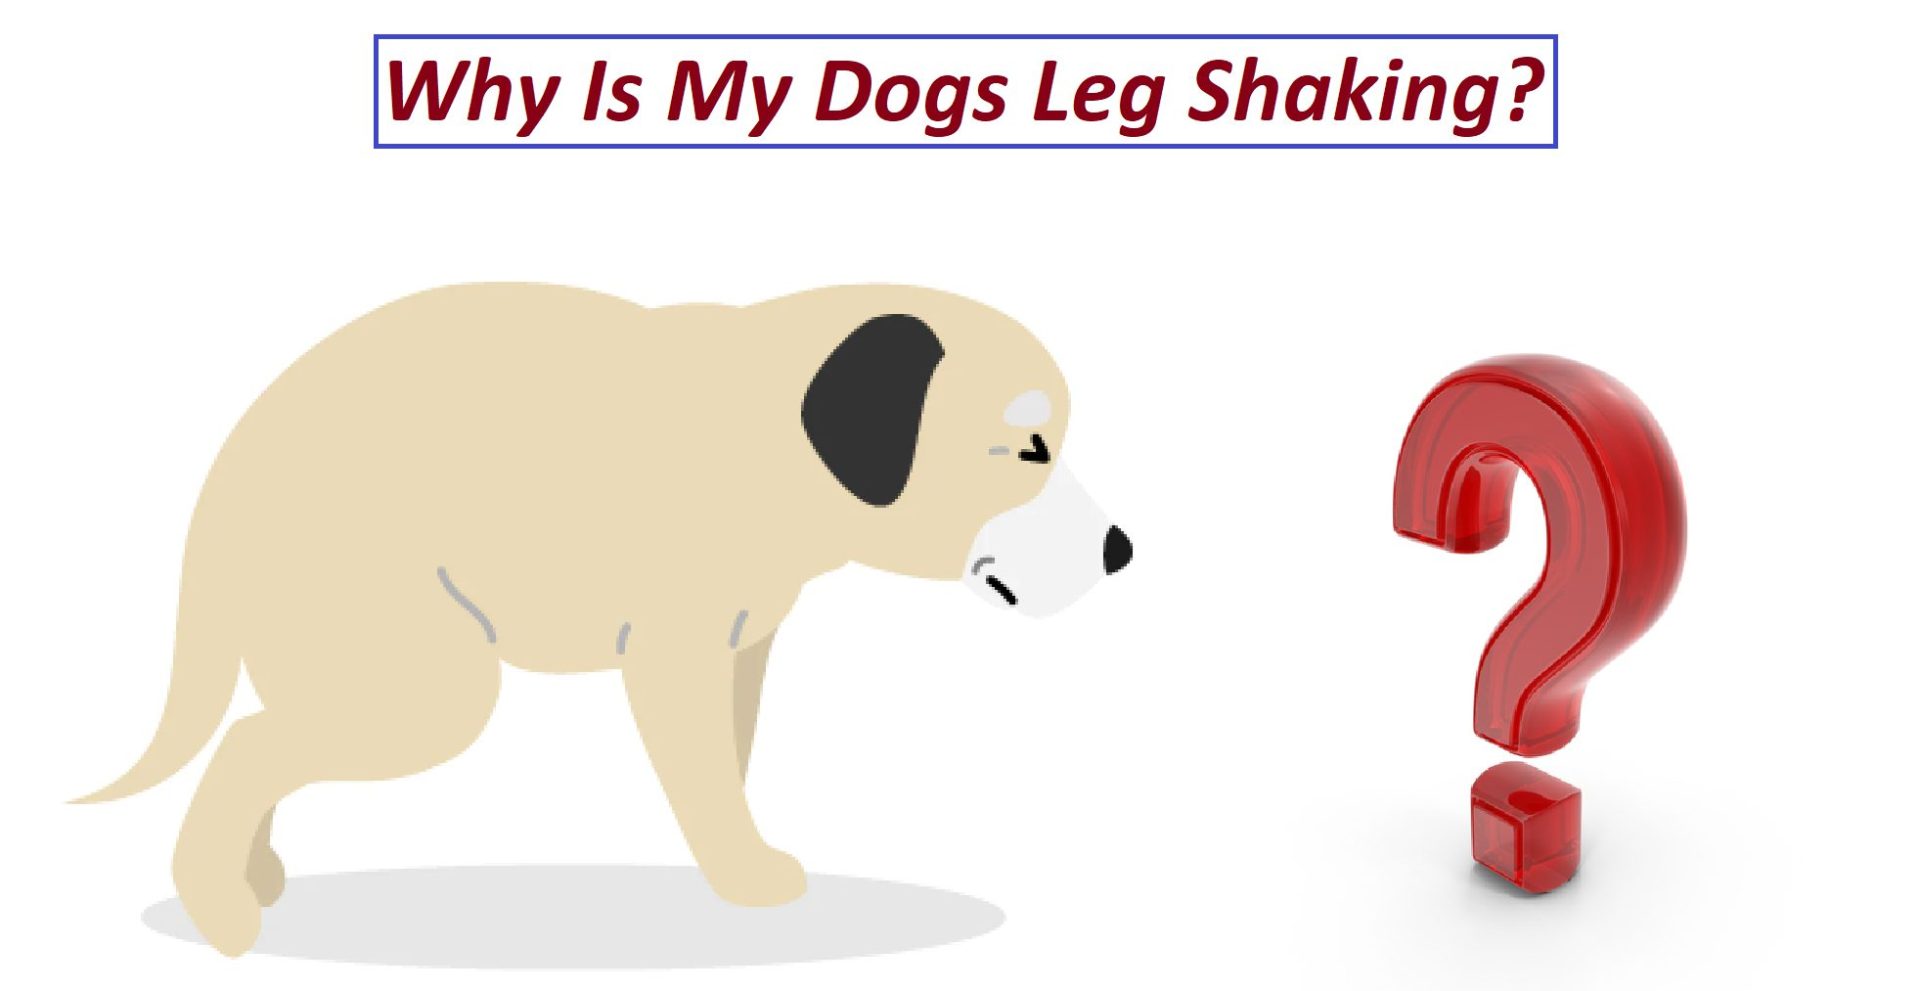 Why Is My Dogs Leg Shaking?